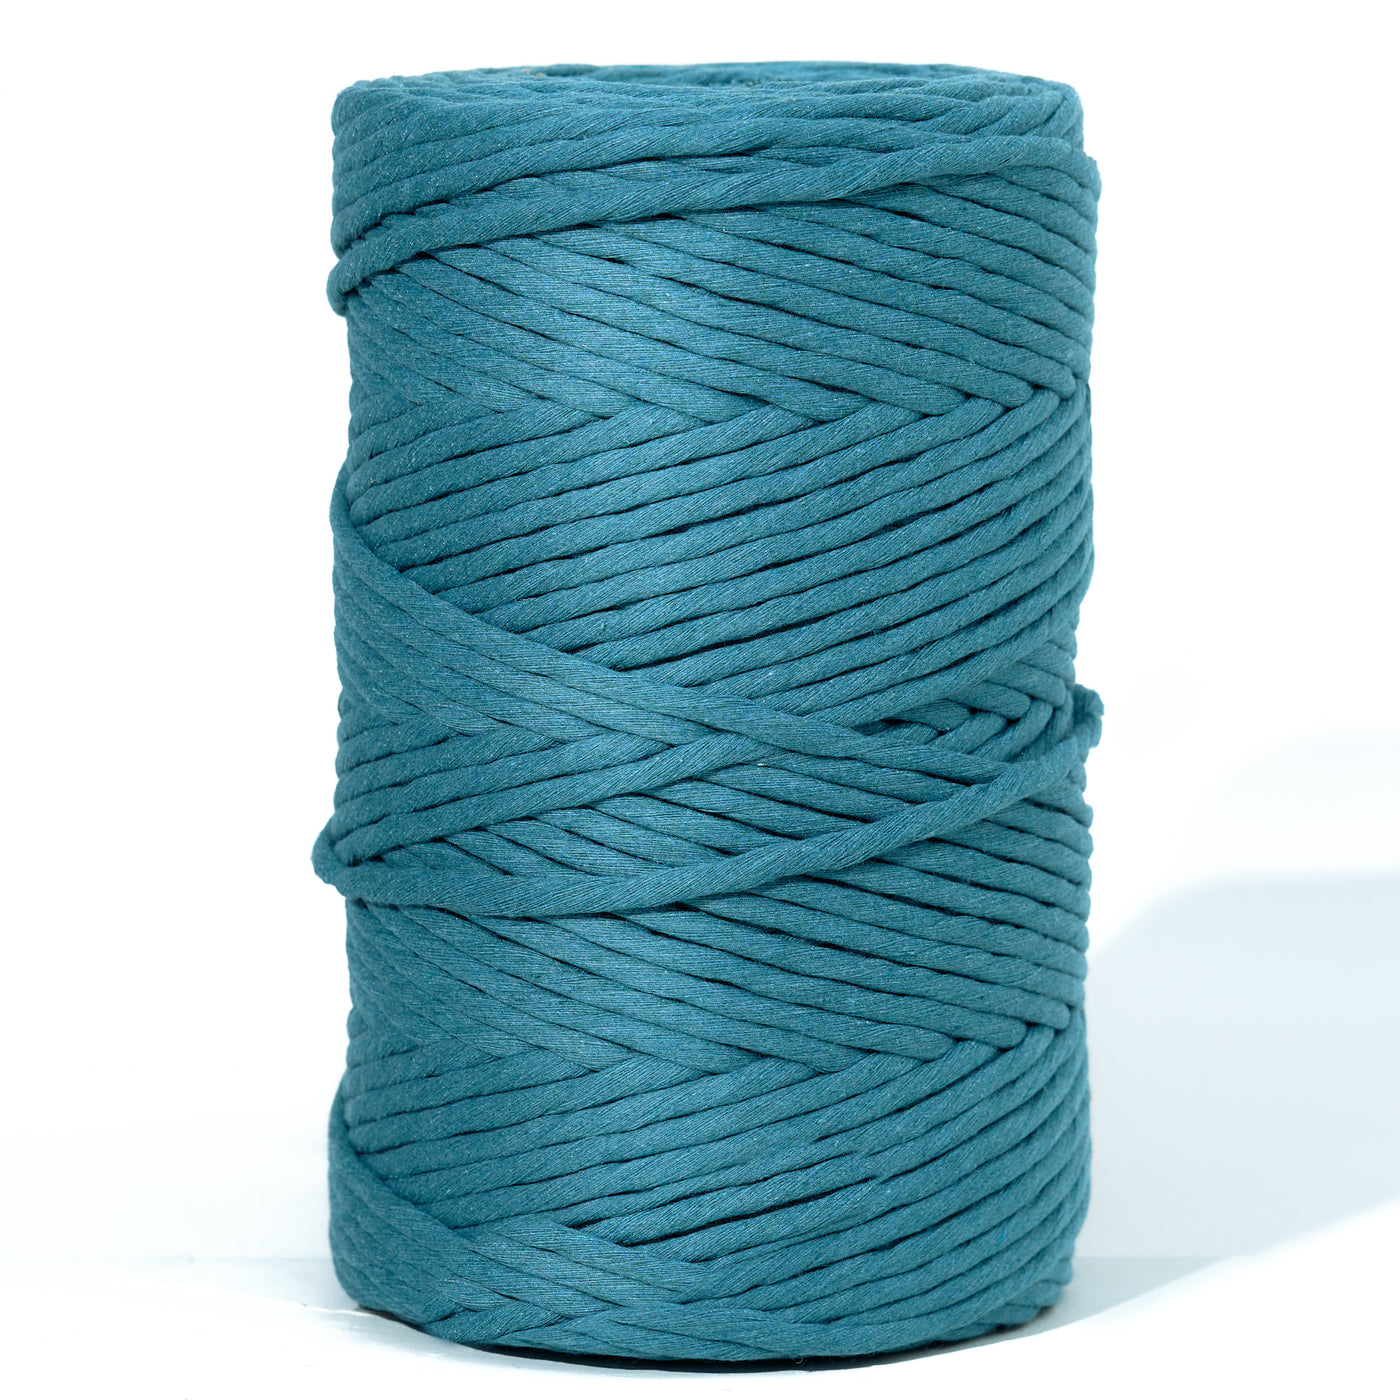 SOFT COTTON CORD ZERO WASTE 6 MM - 1 SINGLE STRAND - OCEAN TEAL COLOR